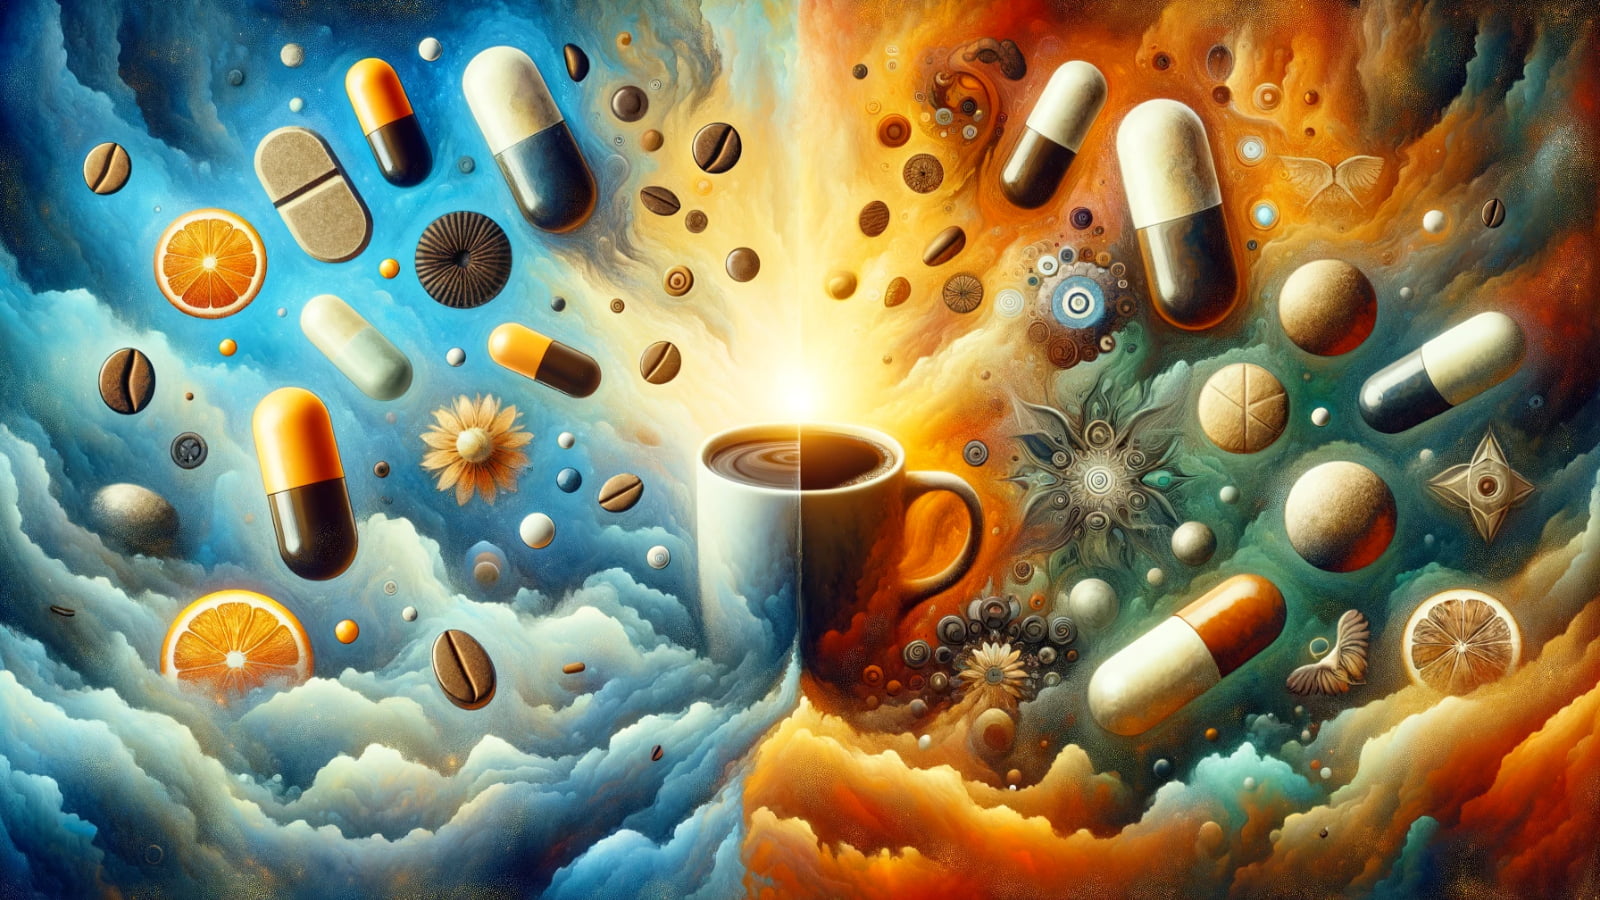 Comparing the safety and effects of caffeine pills and coffee in a balanced, abstract representation.